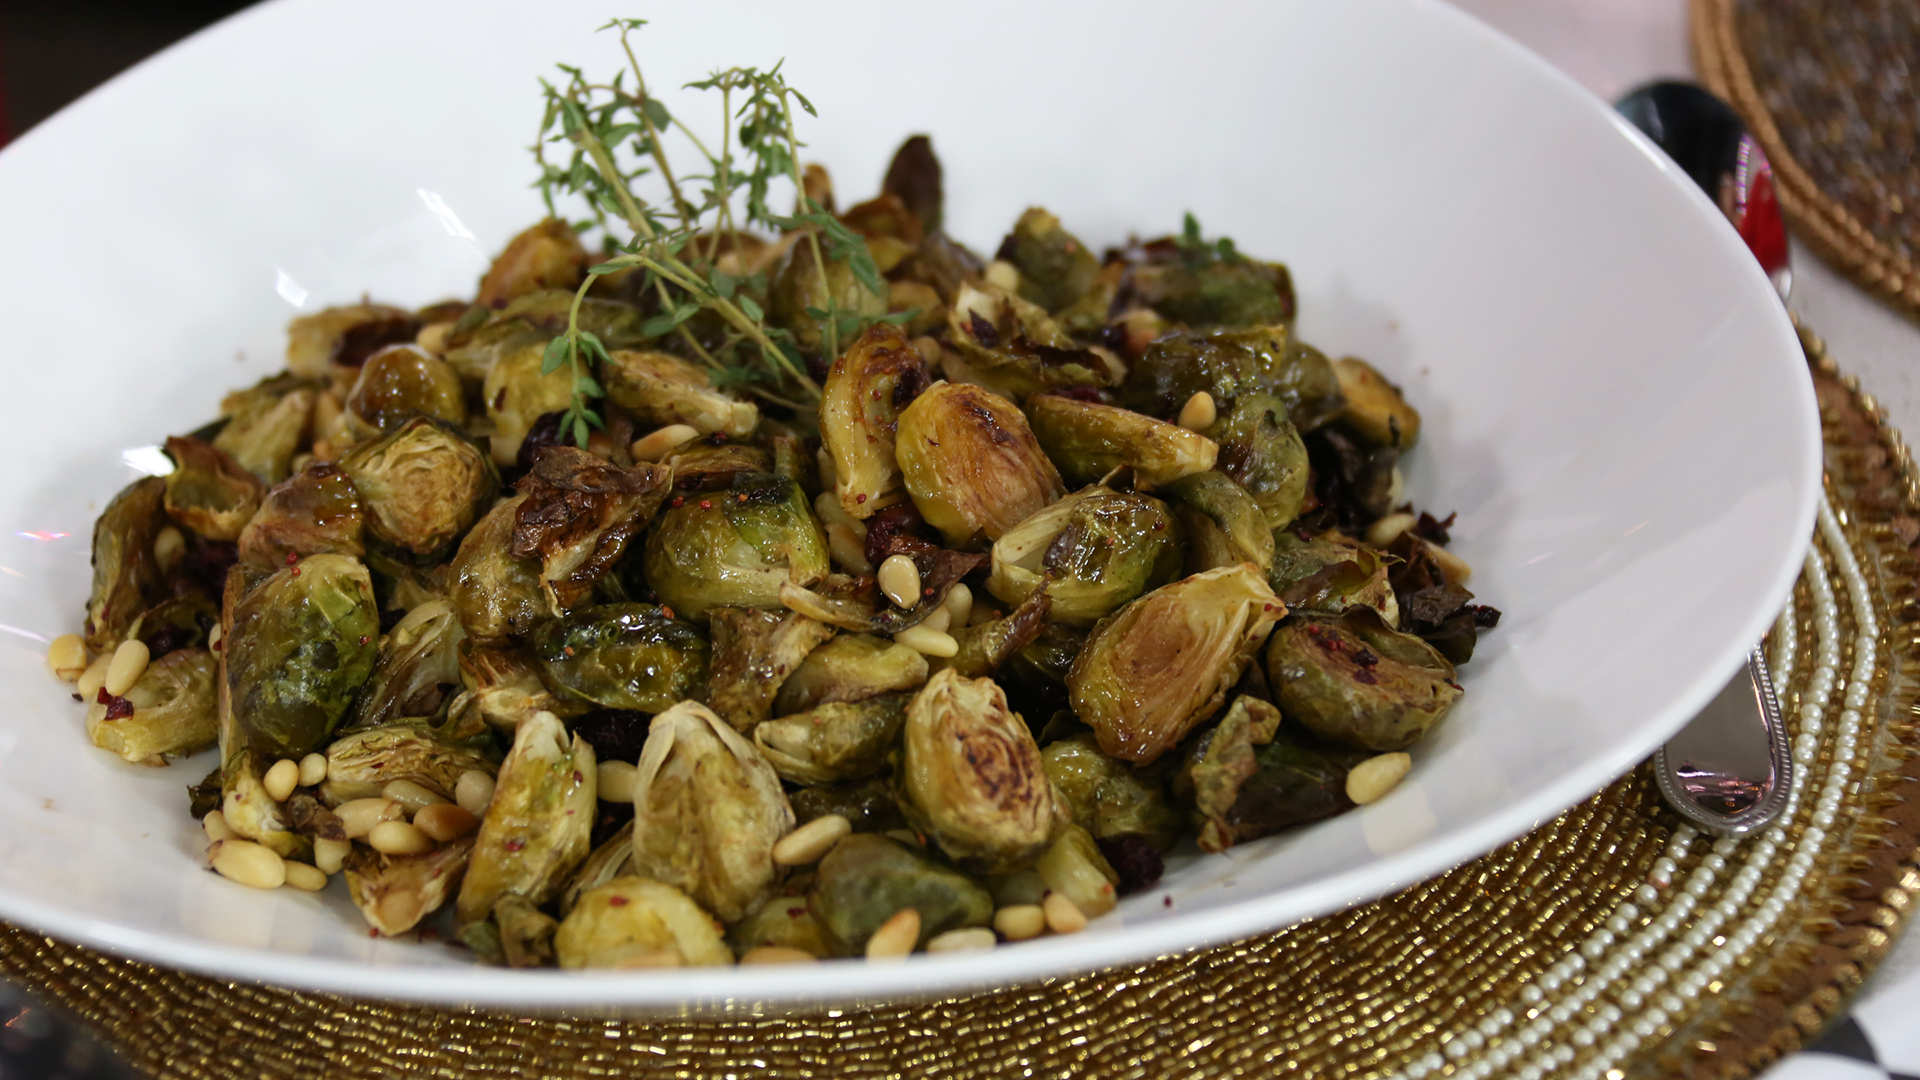 Balsamic cranberry roasted Brussels sprouts